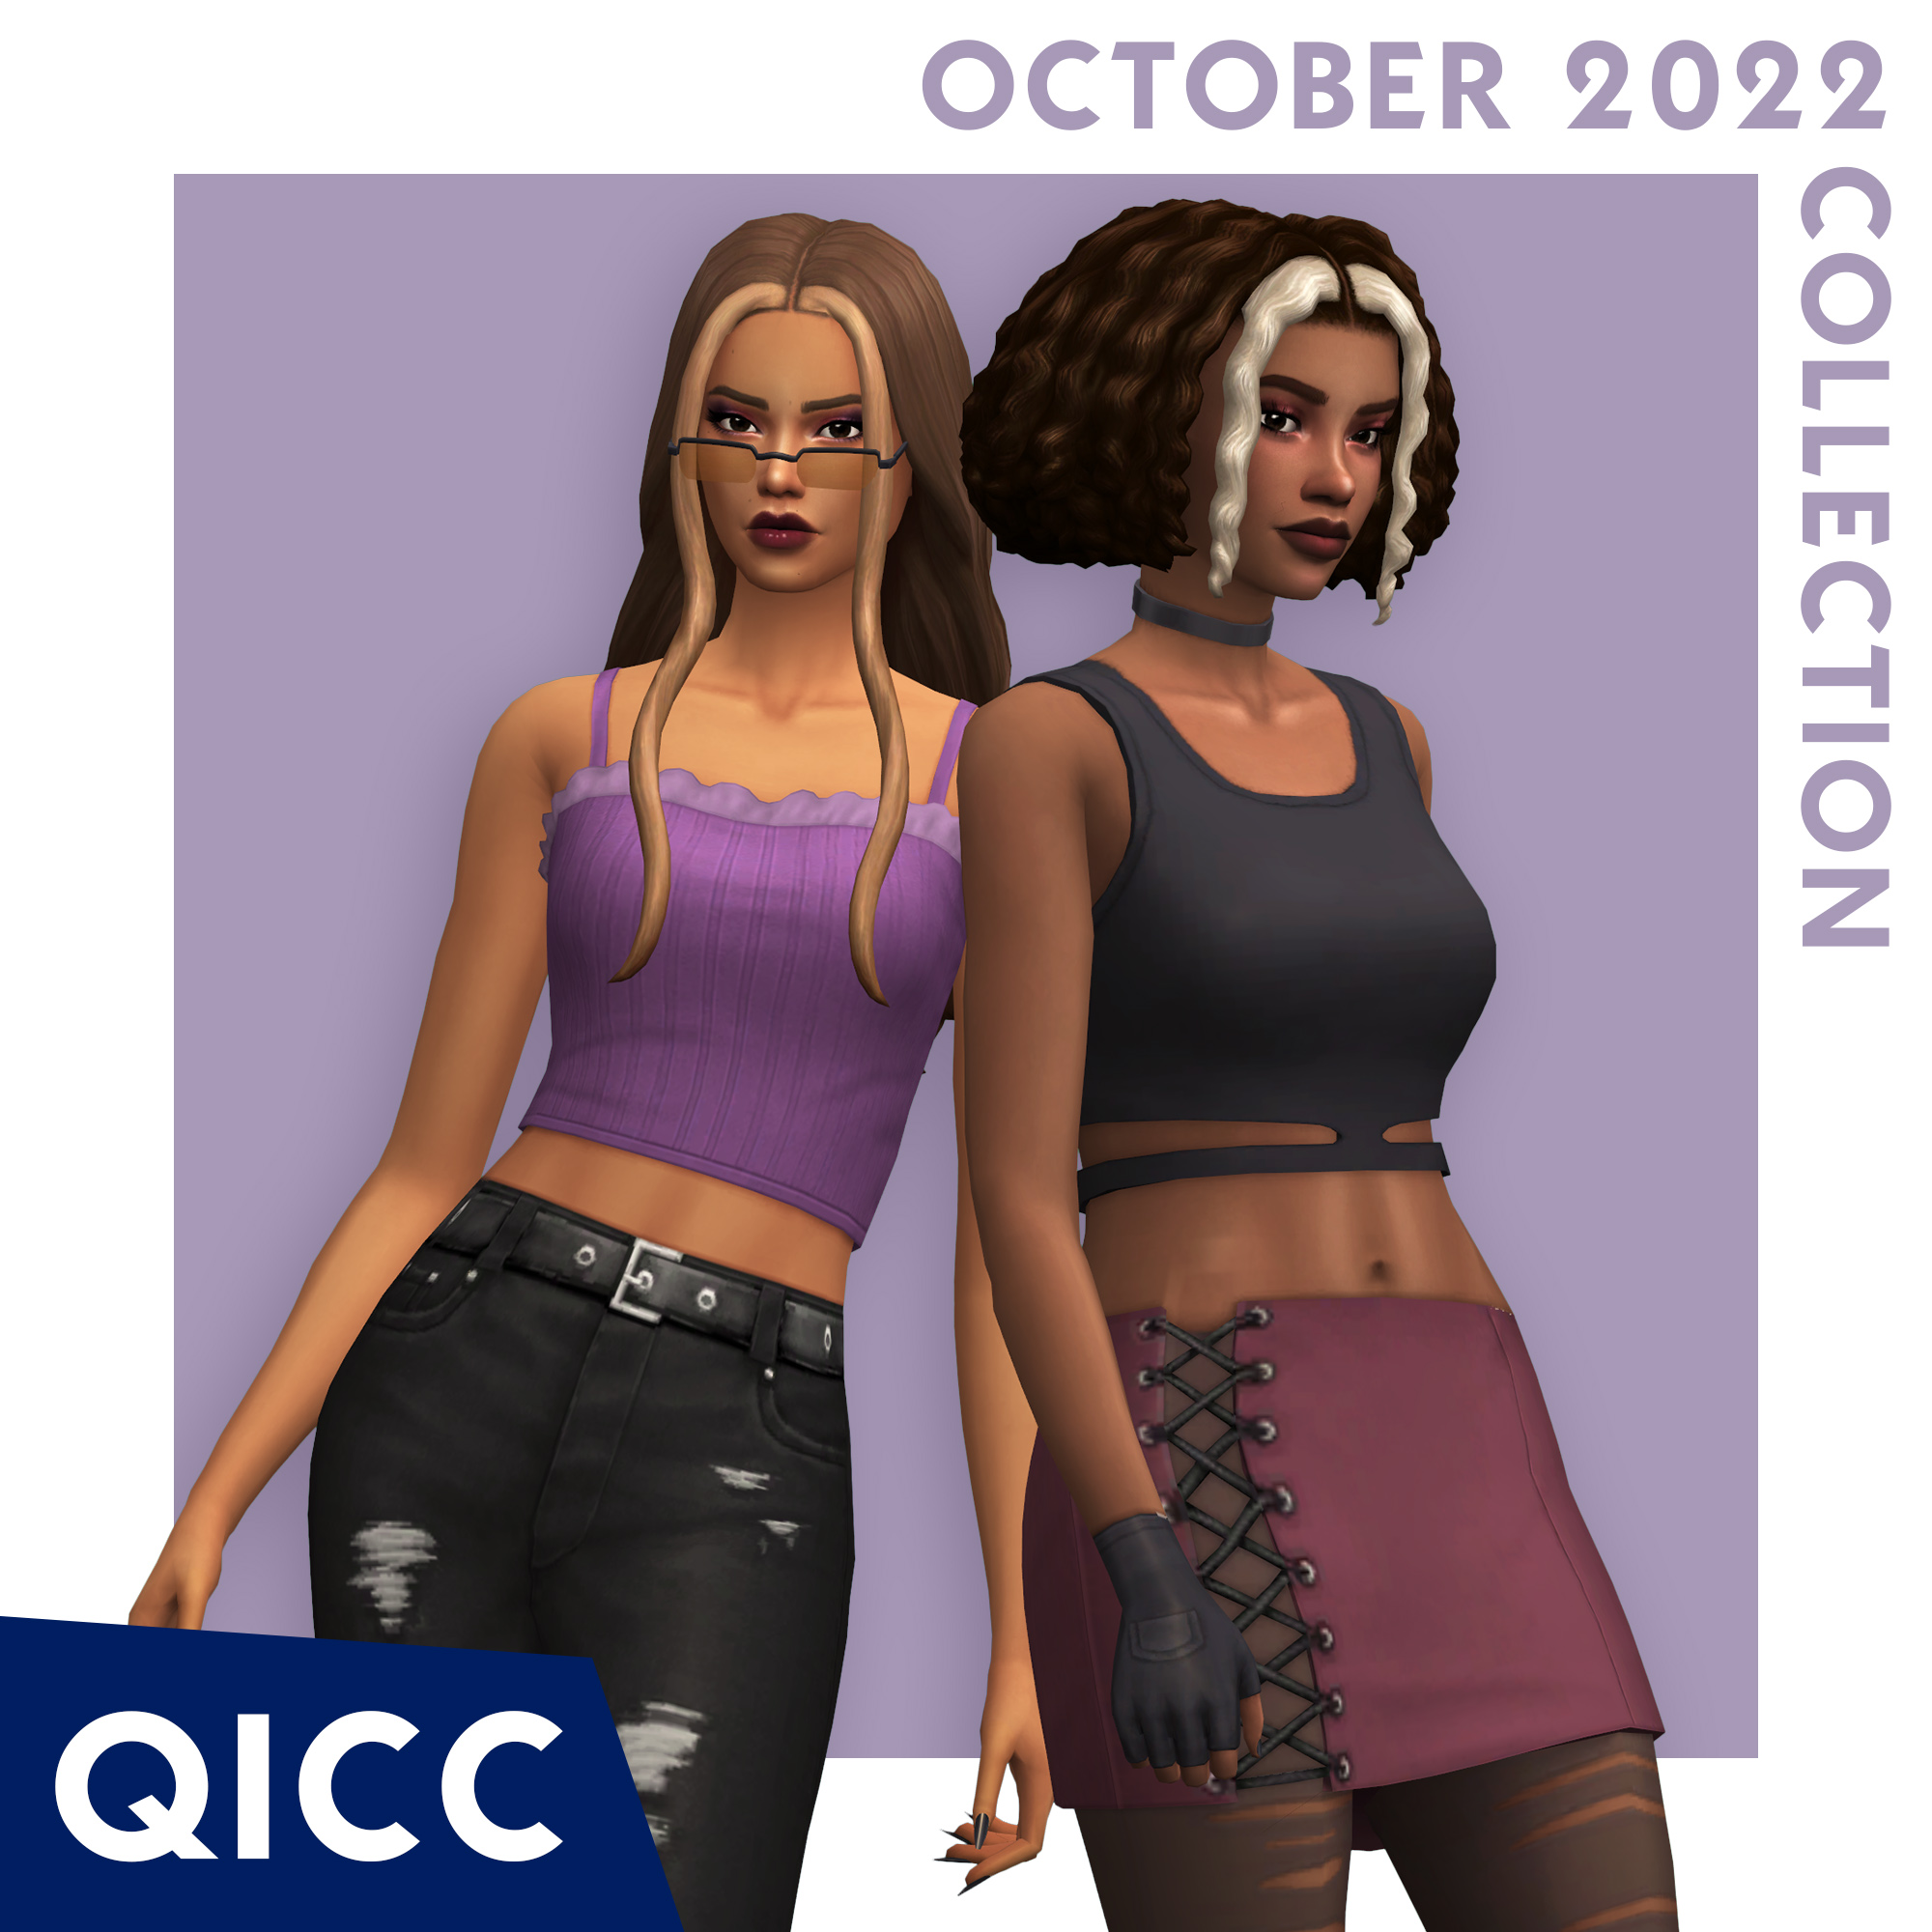 QICC - October 2022 Collection project avatar